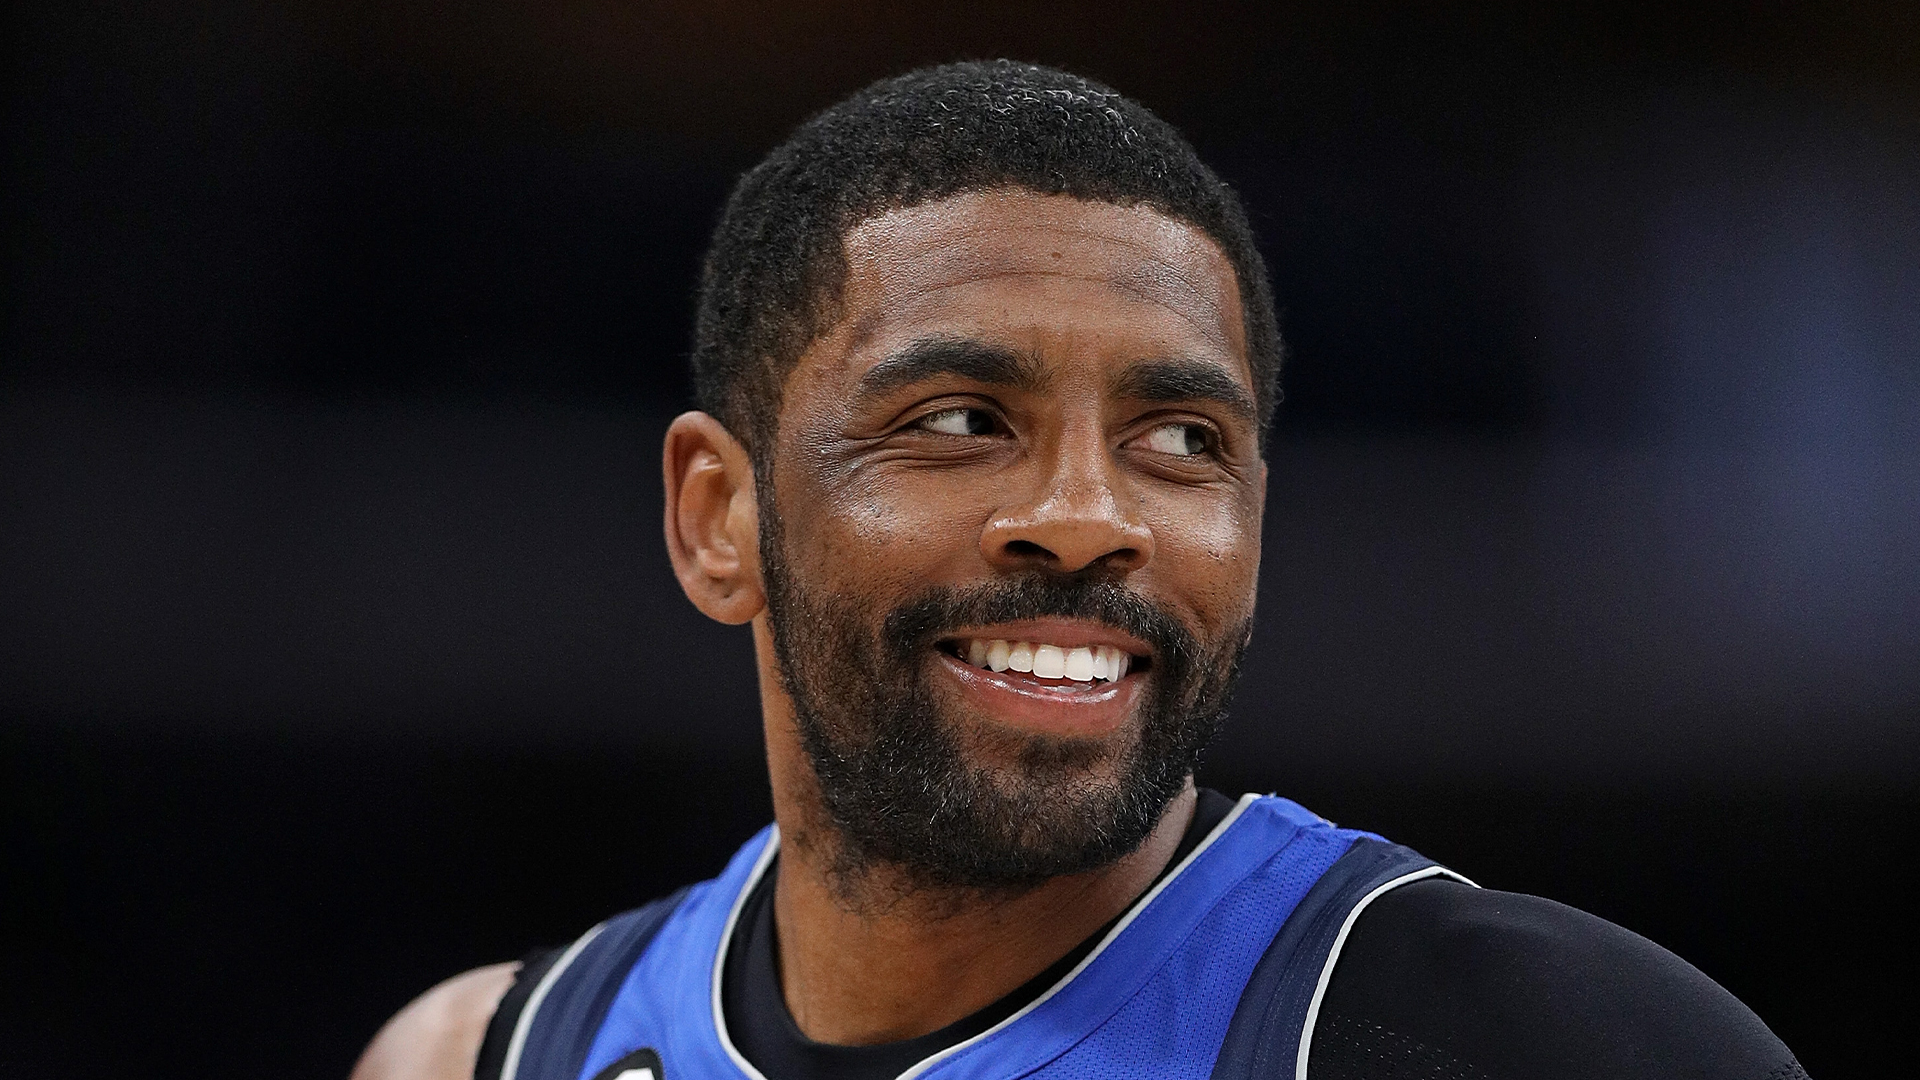 Kyrie Irving Invests In The Digital Sneaker Marketplace Kicks Crew And Becomes Its Chief Community Officer